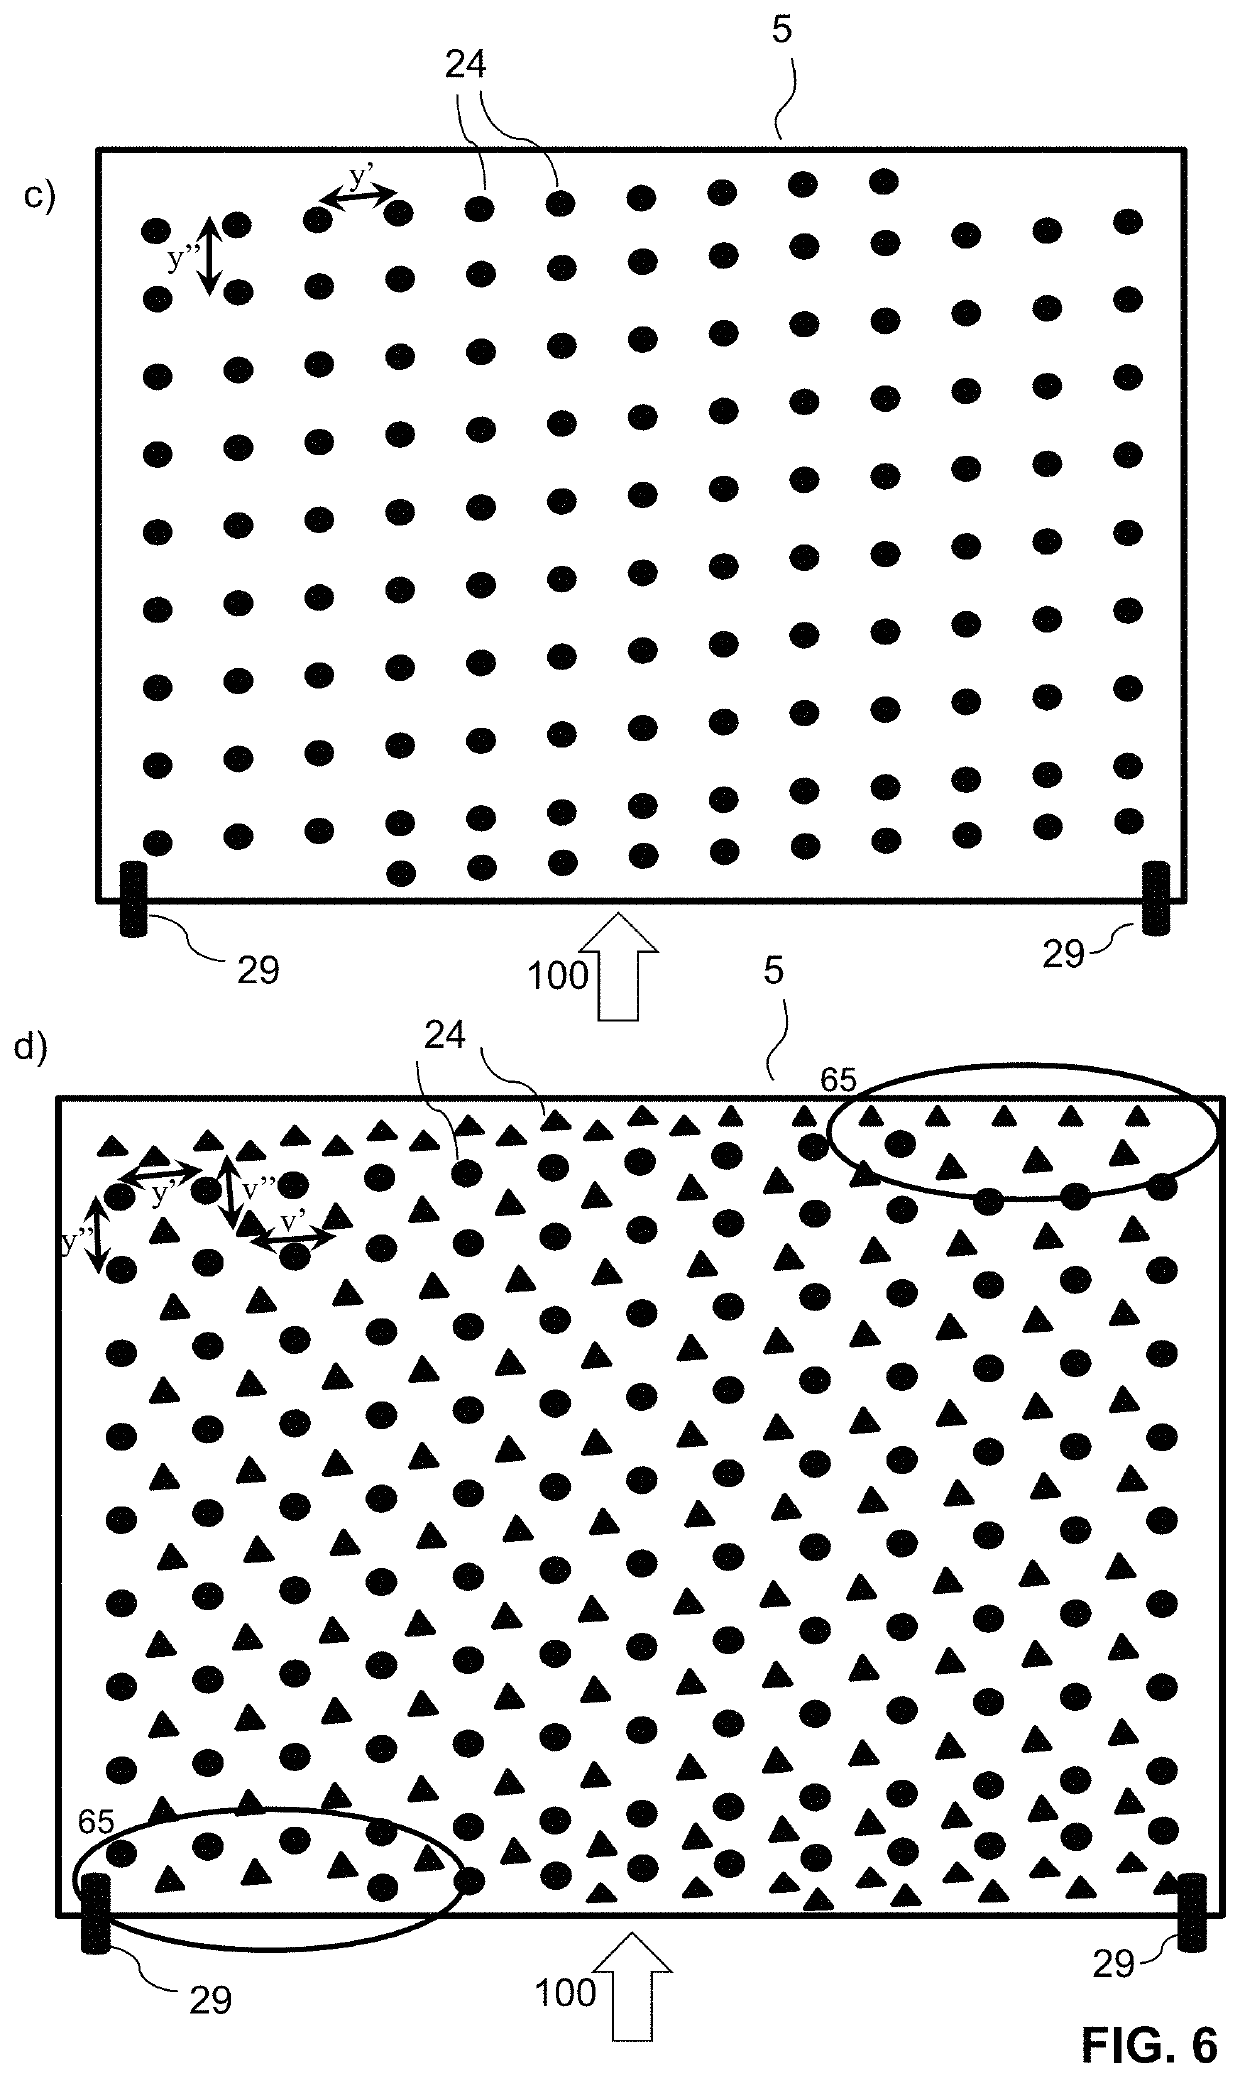 Low-pressure drop structure of particle adsorbent bed for improved adsorption gas separation process